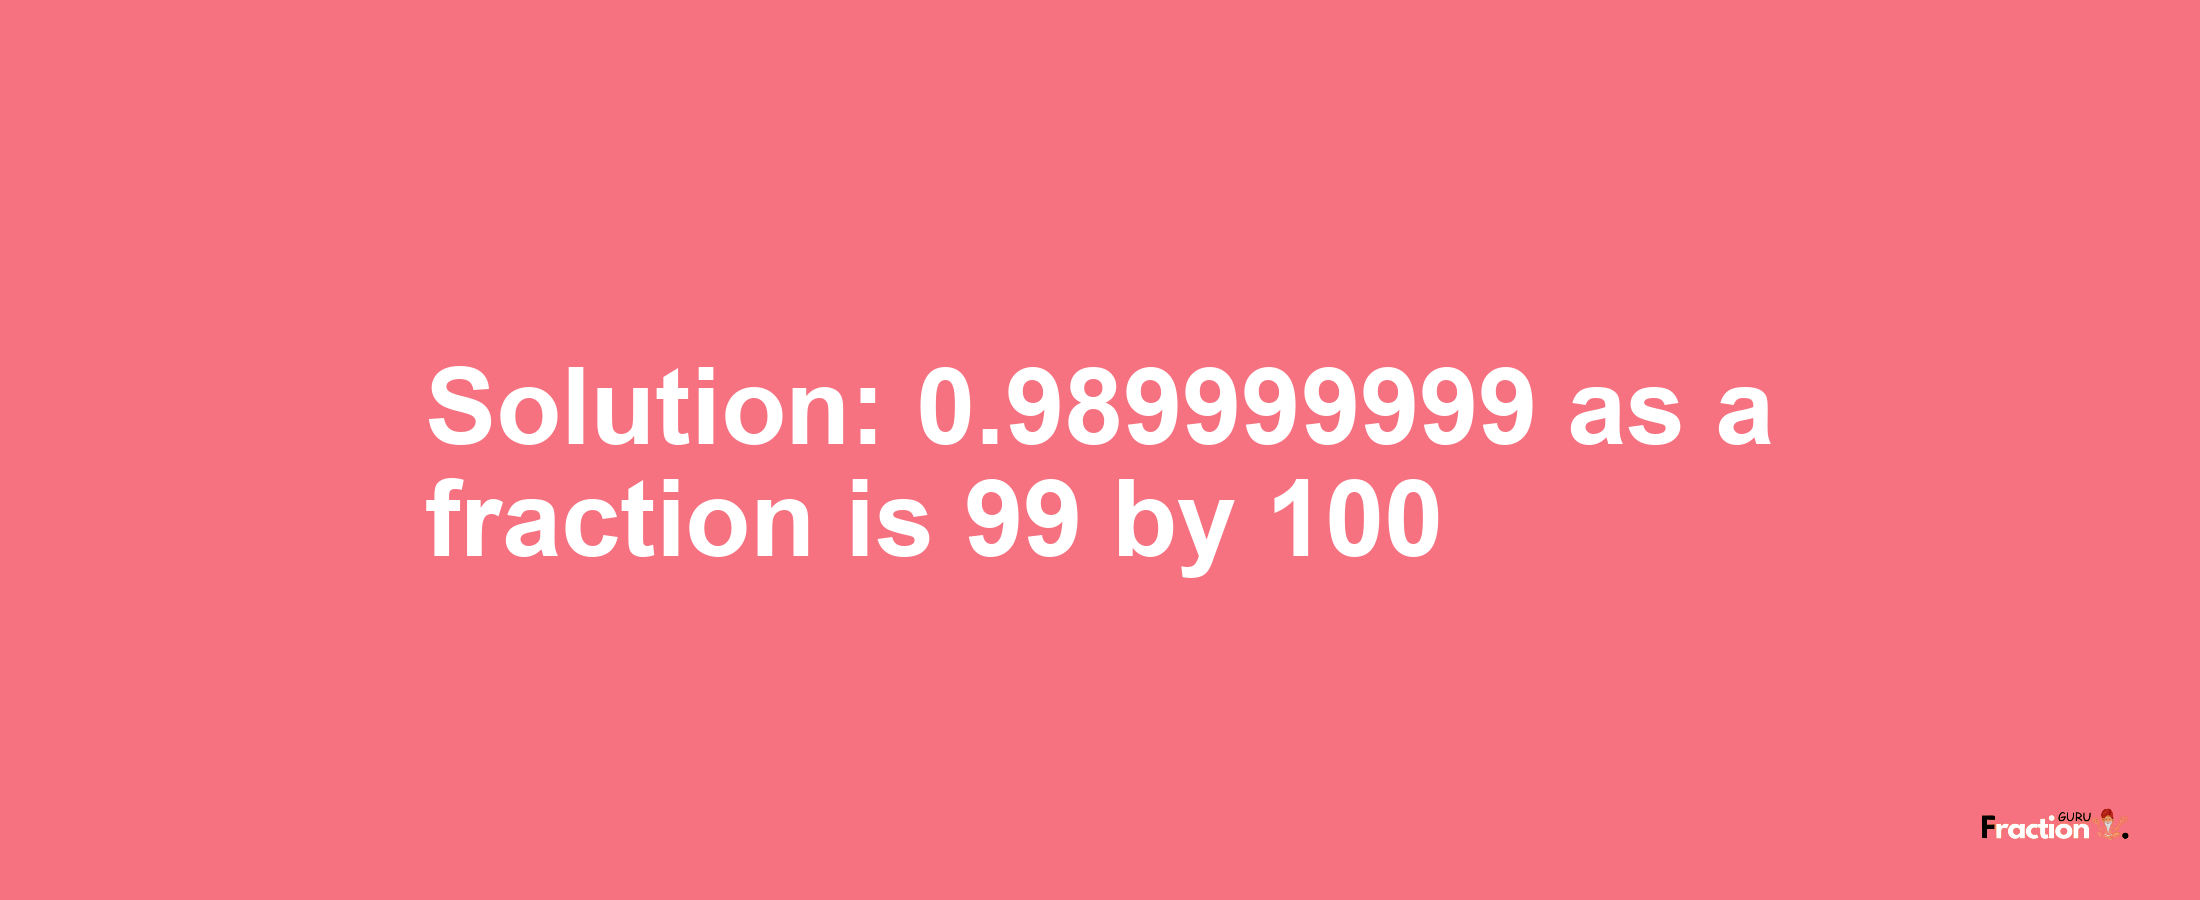 Solution:0.989999999 as a fraction is 99/100